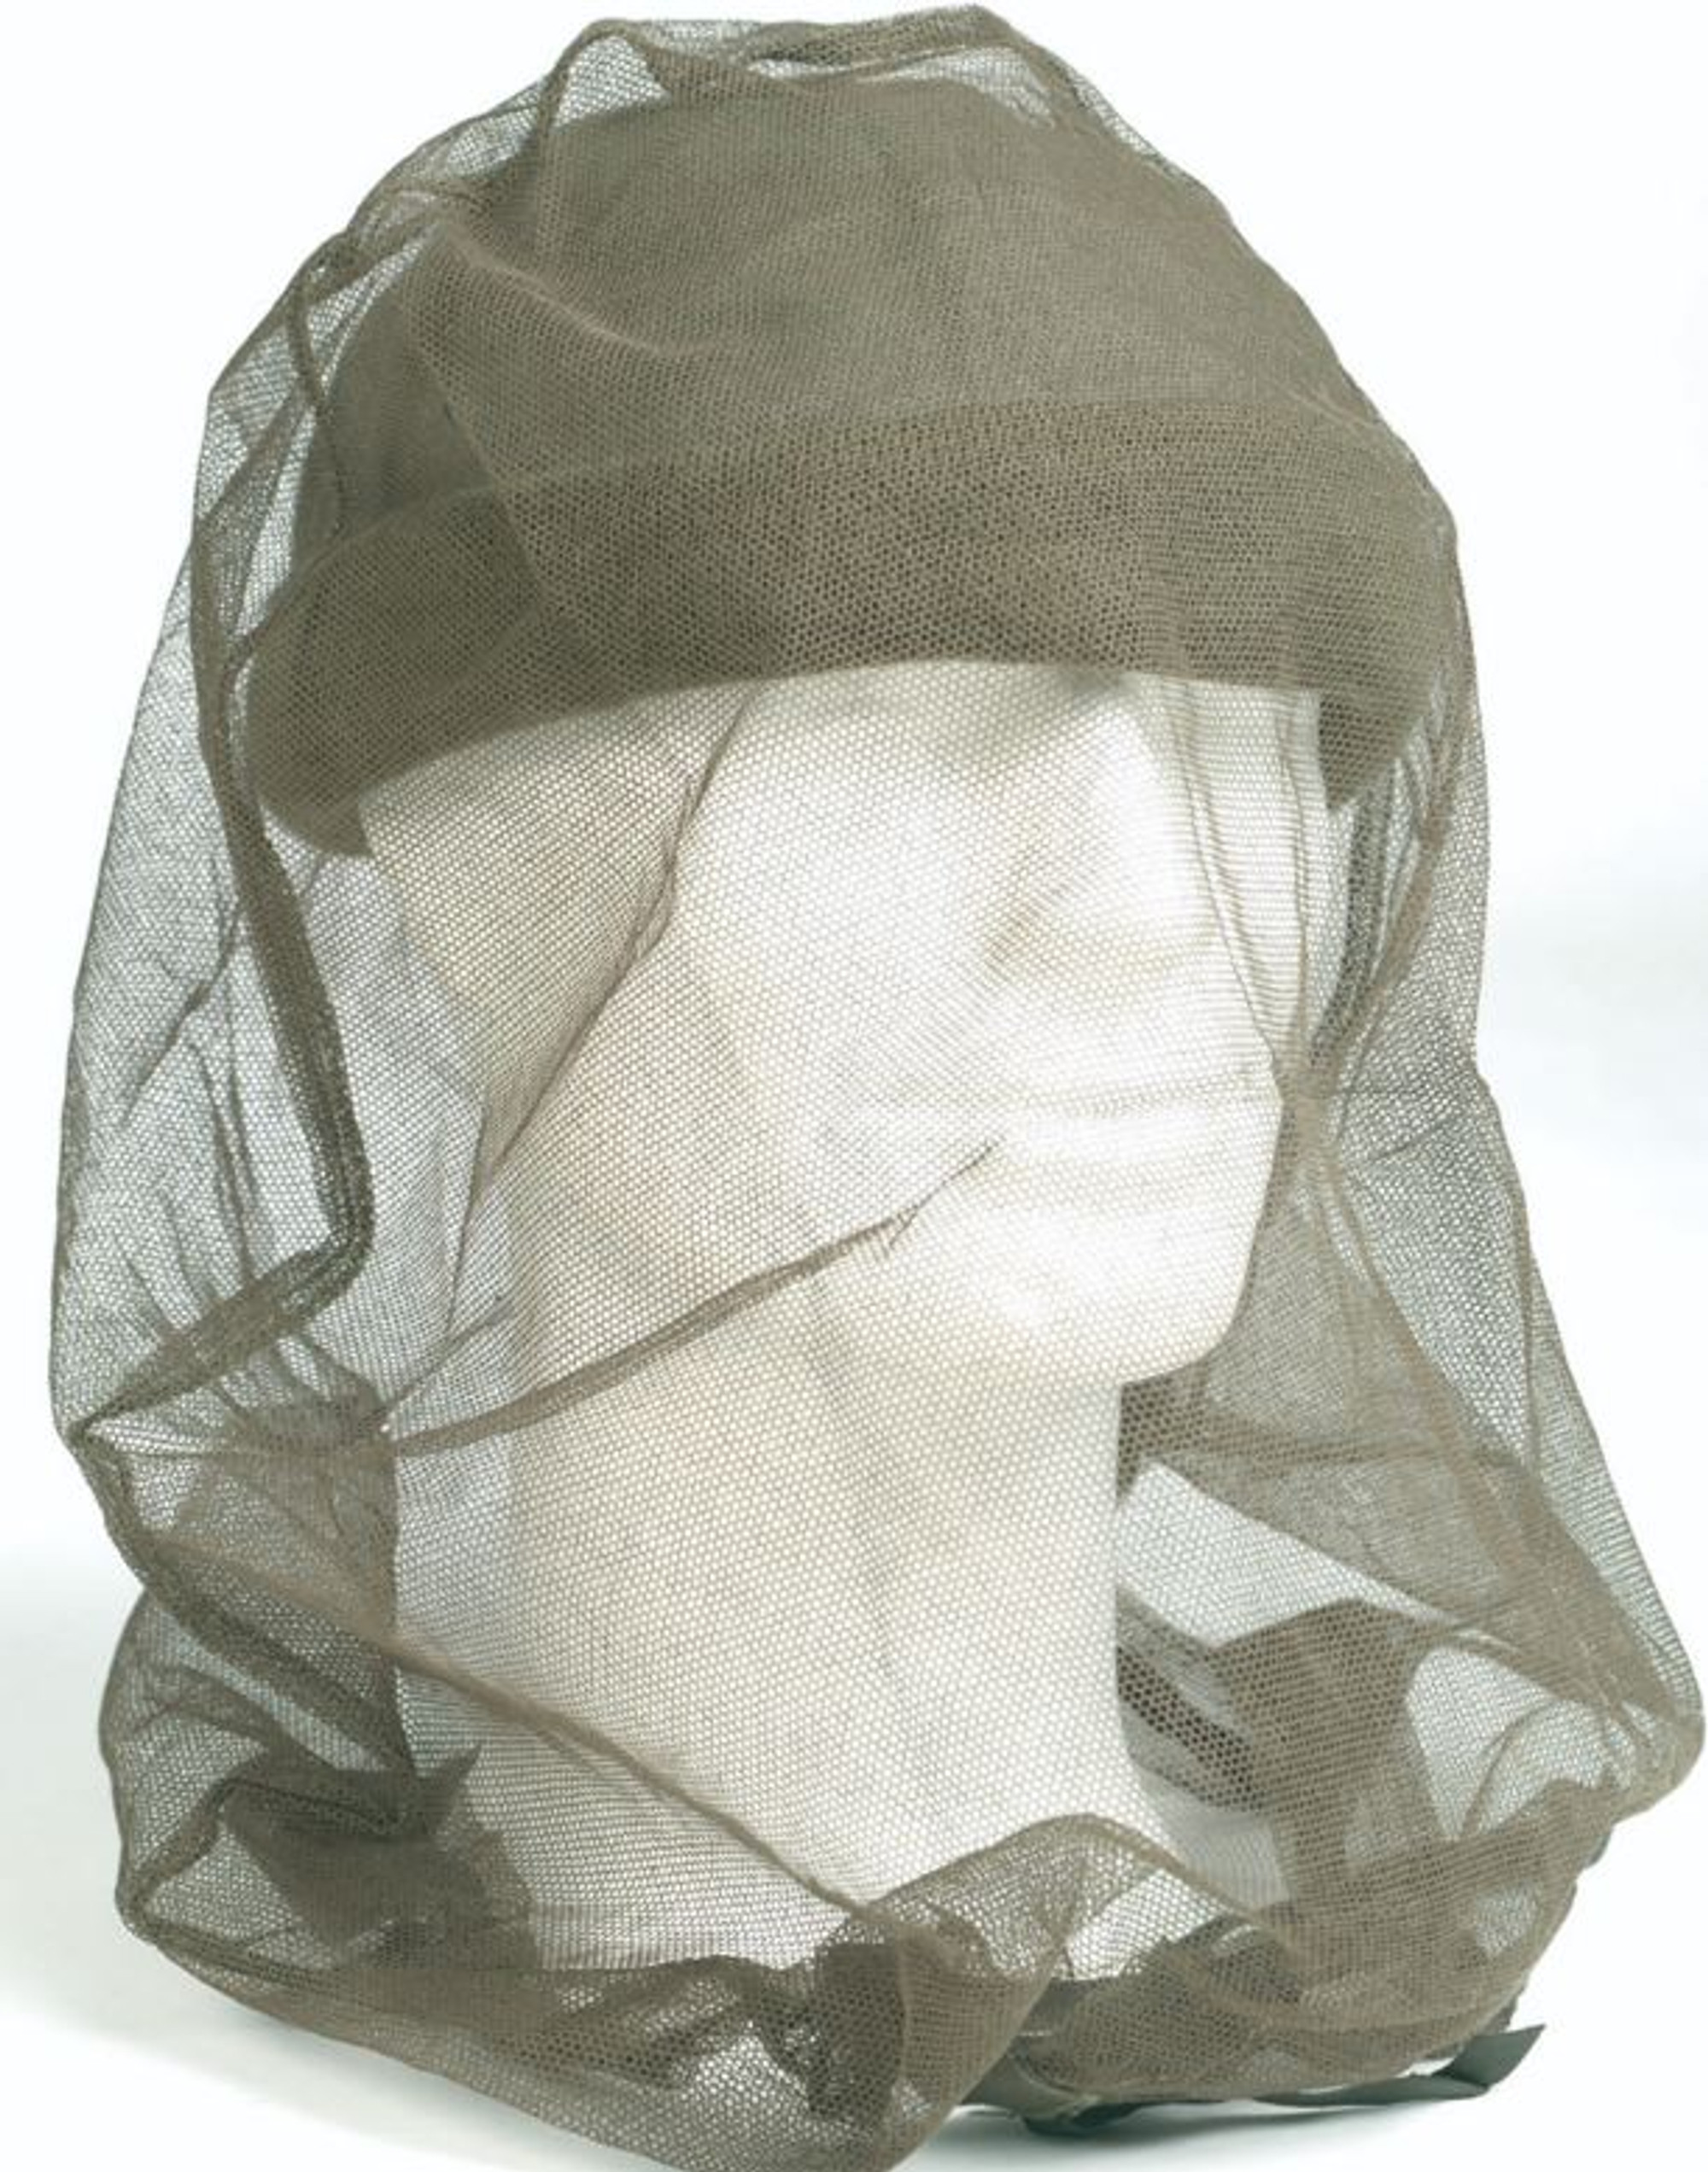 German Armed Forces Mosquito Head Net